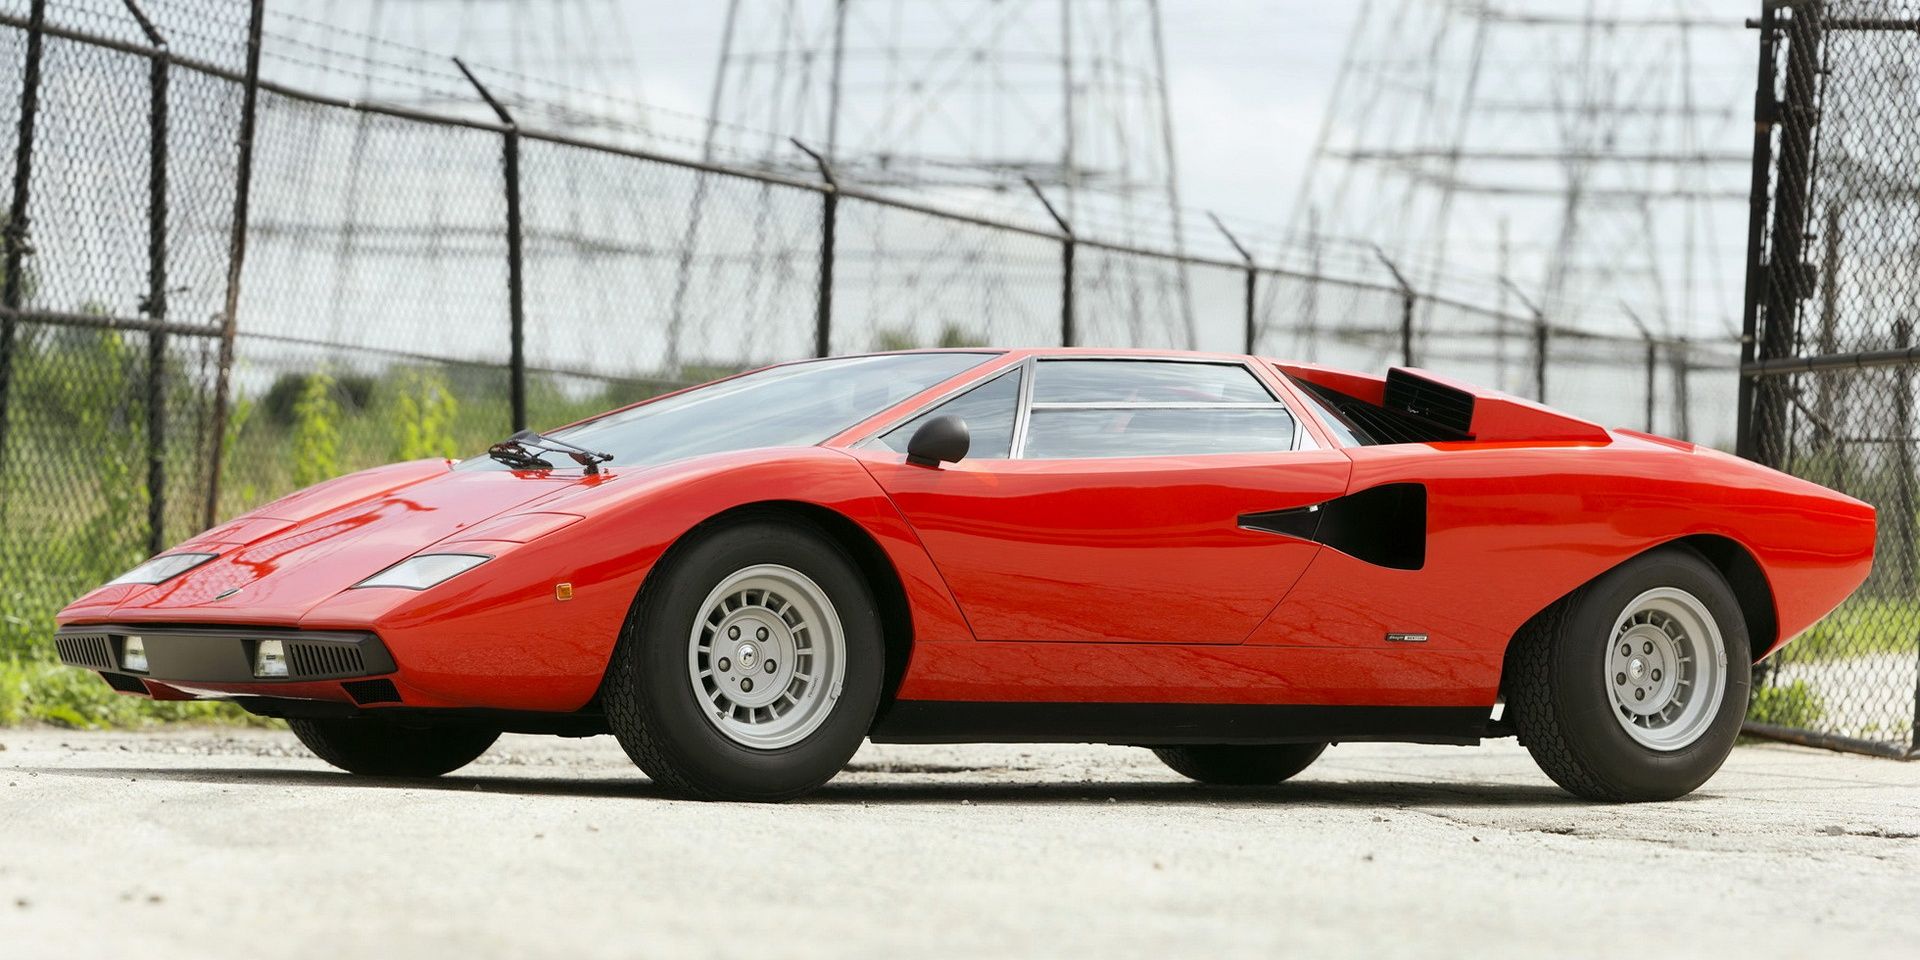 A red 1974 Lamborghini Countach Parked in front of a high-fenced ground